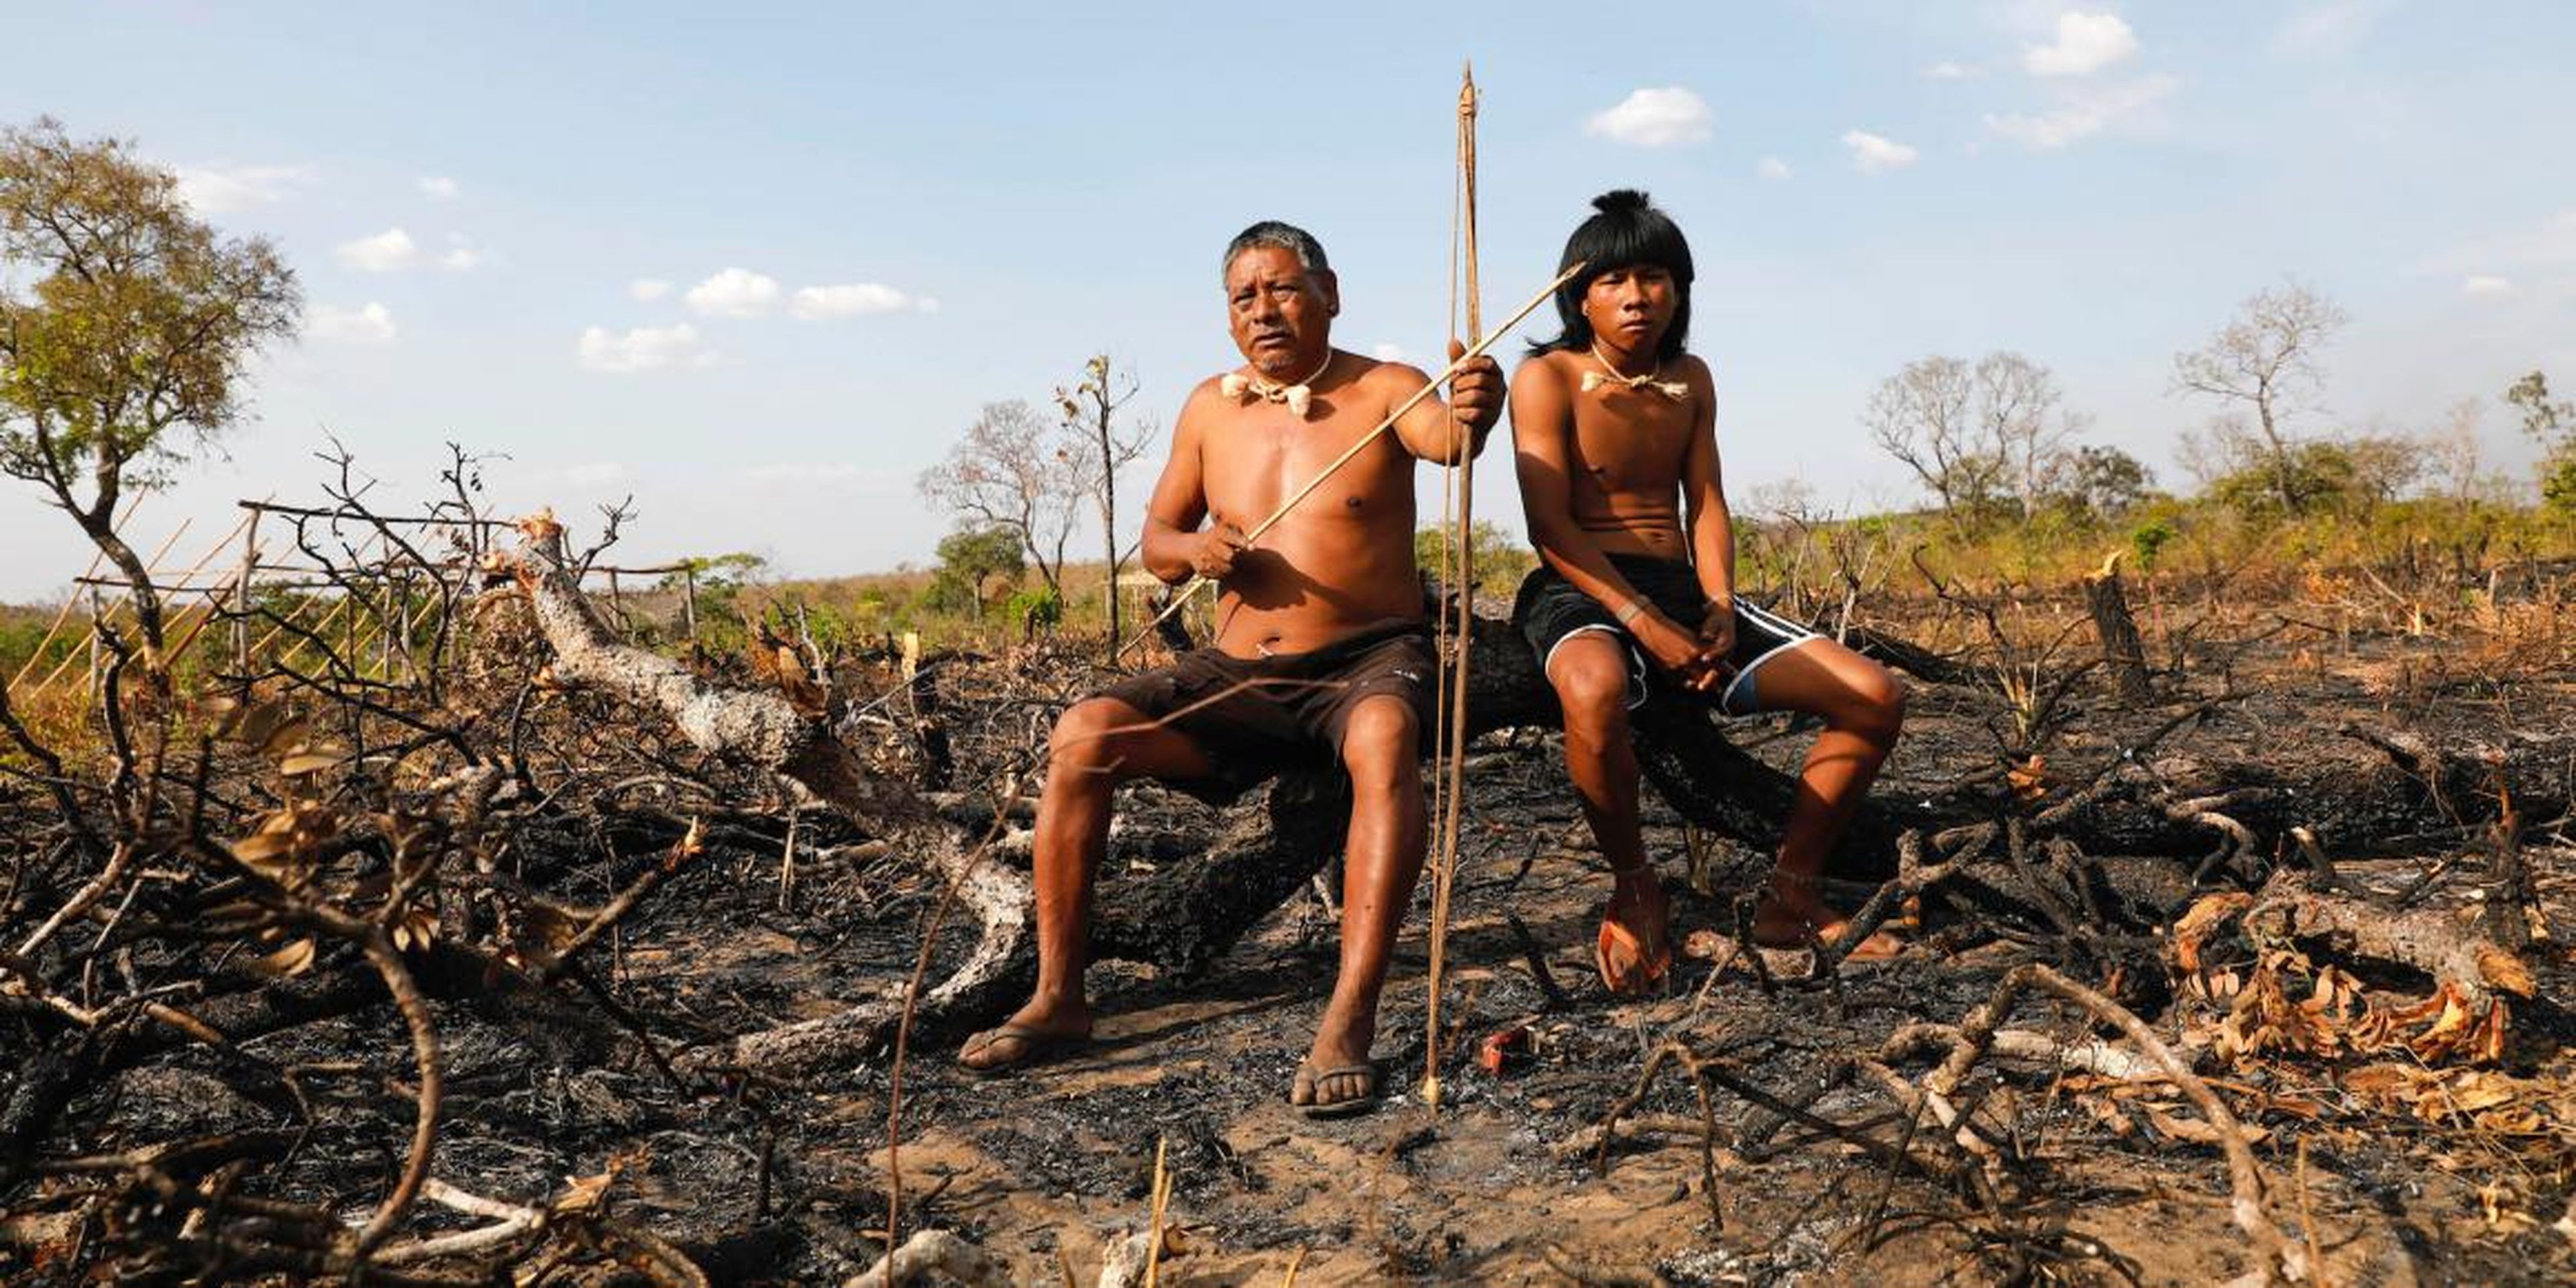 Members of the Xavante tribe sit on charred branches in the Amazon Rainforest.